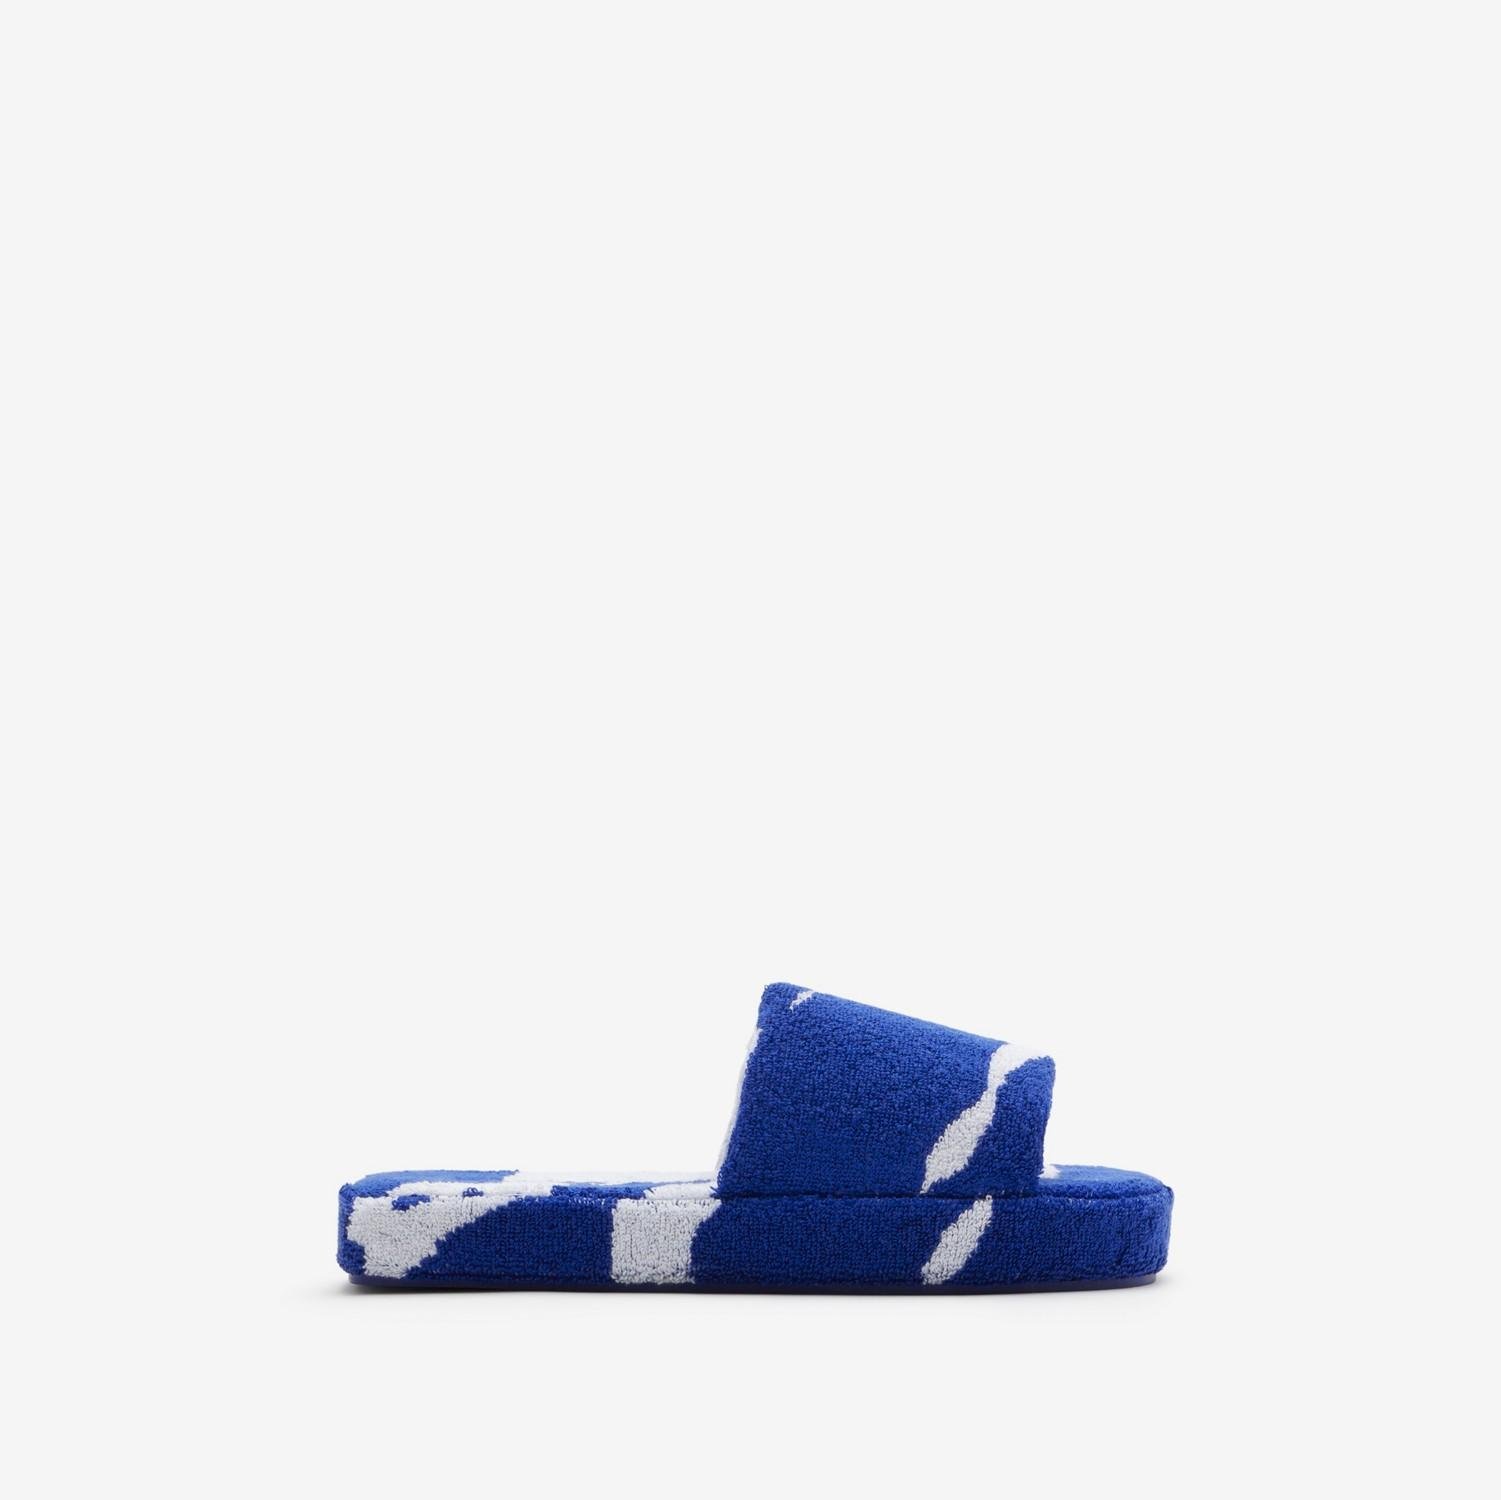 Snug Slippers by BURBERRY